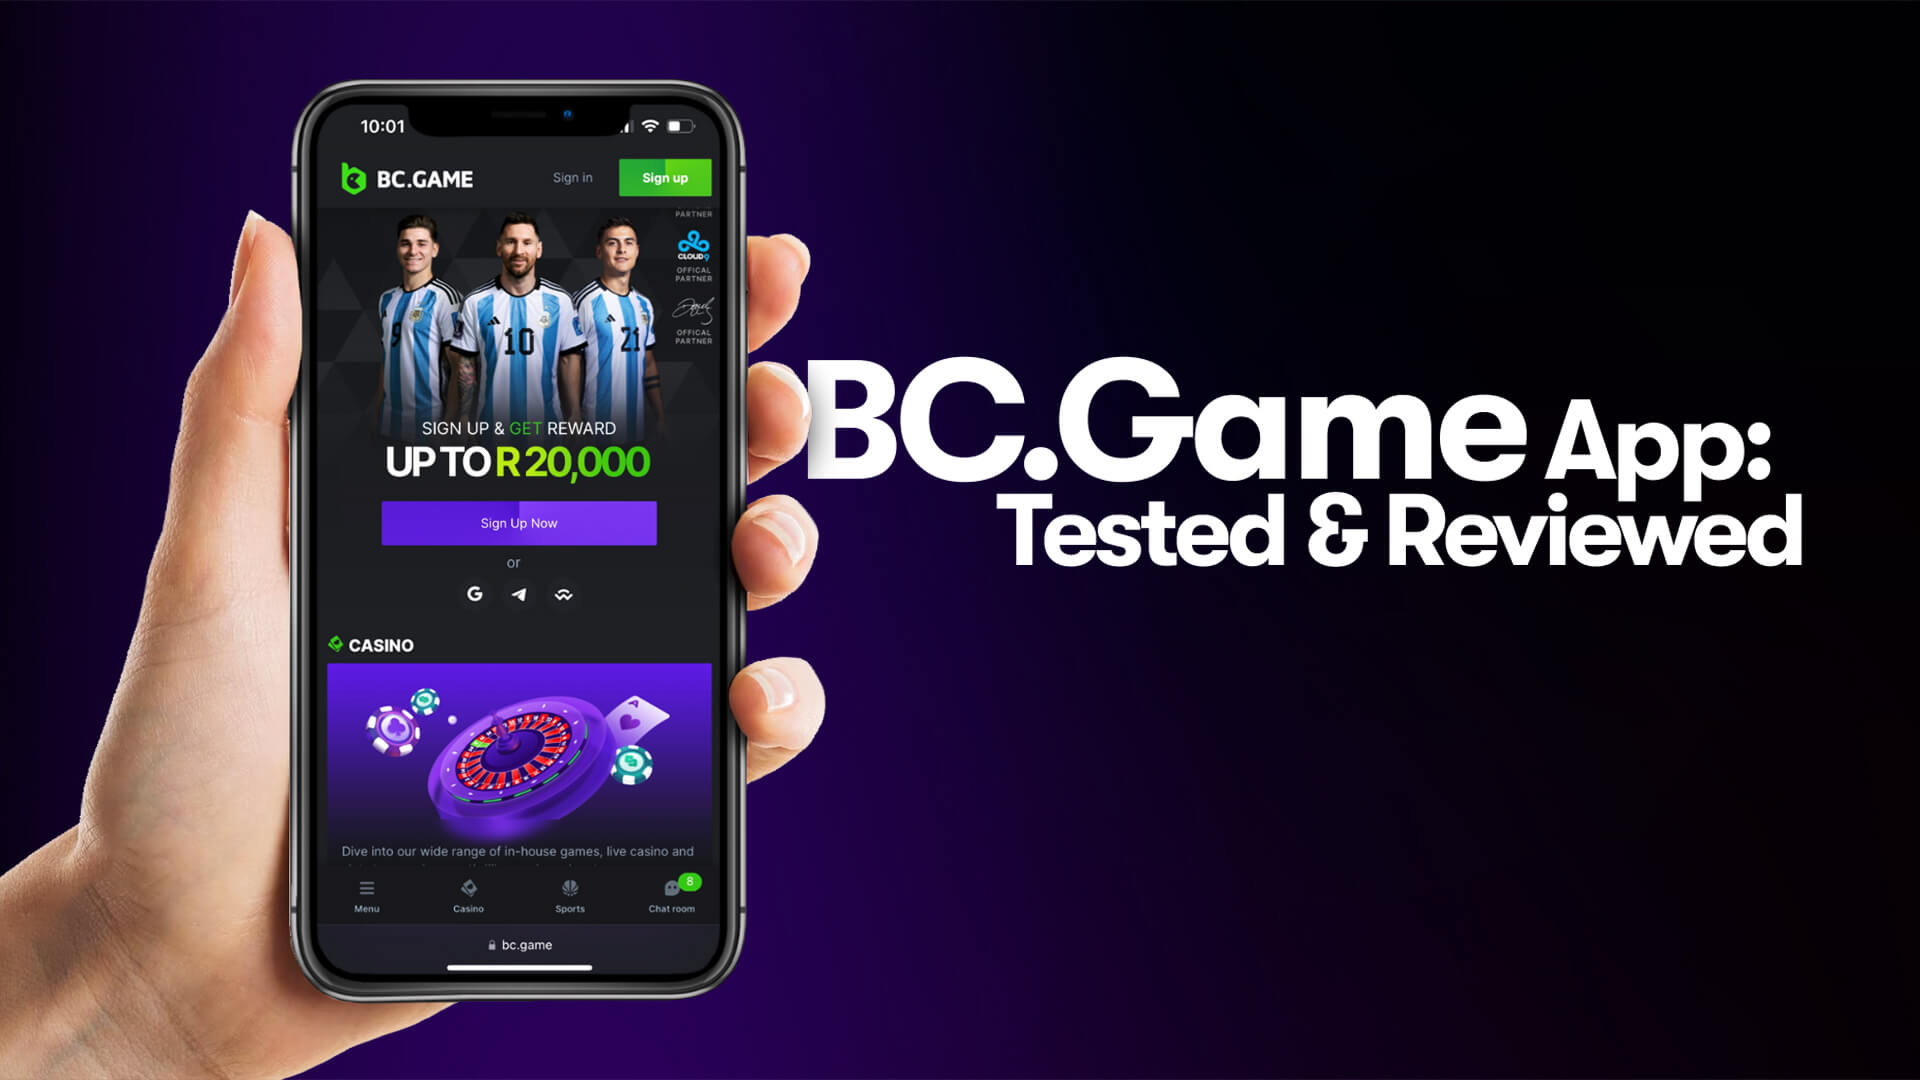 Now You Can Have The BC.Game Download free application foe Android and iOS Of Your Dreams – Cheaper/Faster Than You Ever Imagined